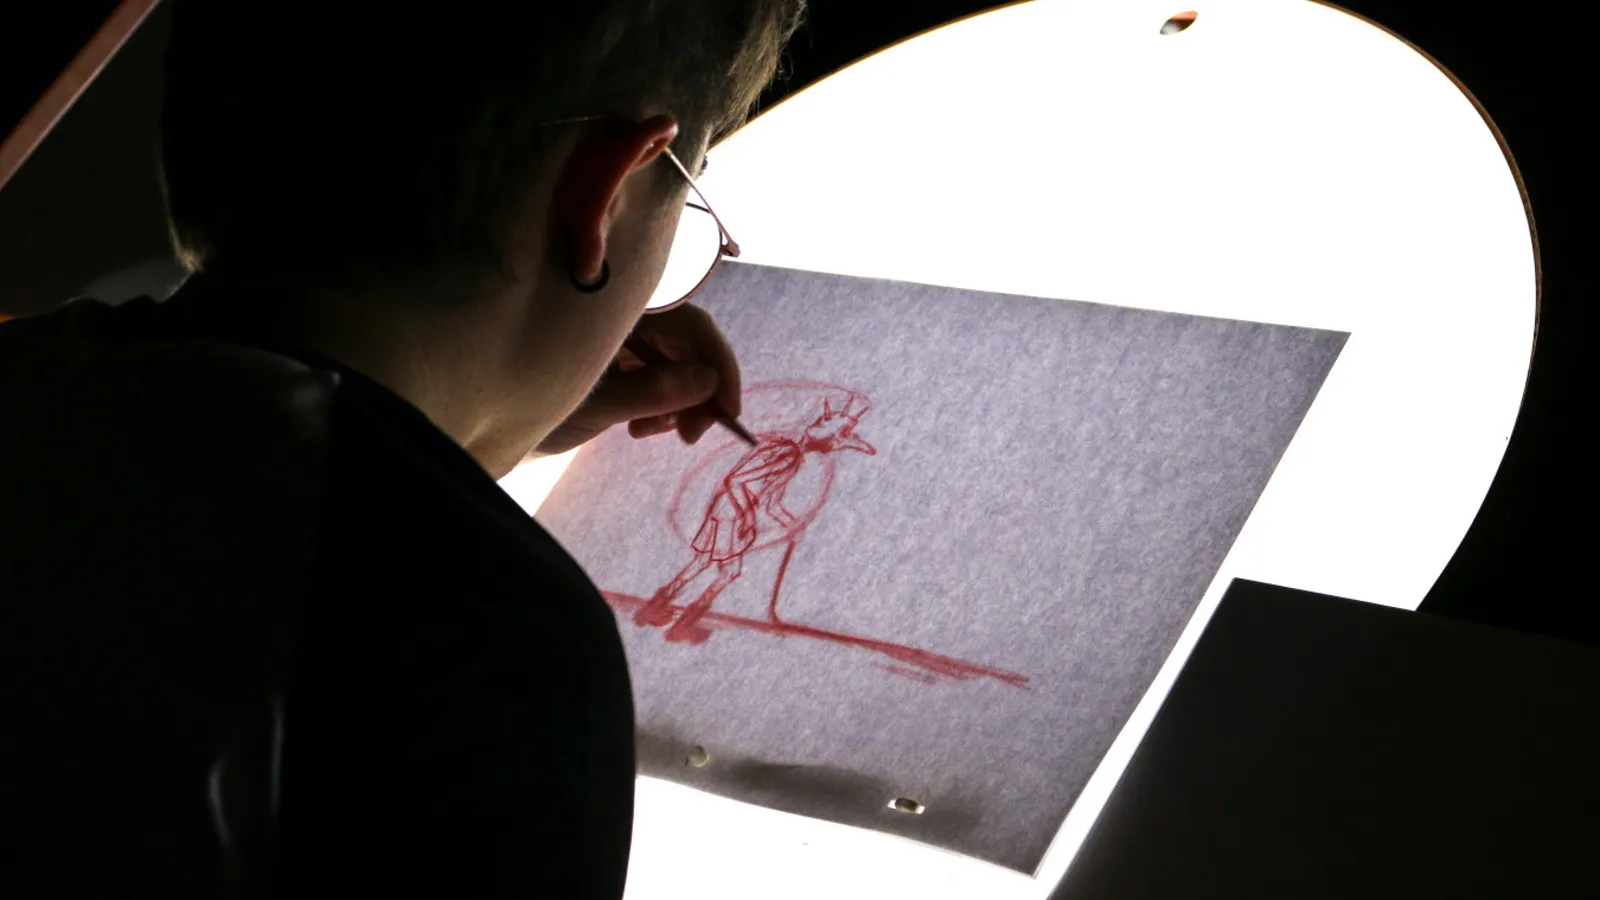 A boy drawing a frame of his animation on a lightbox